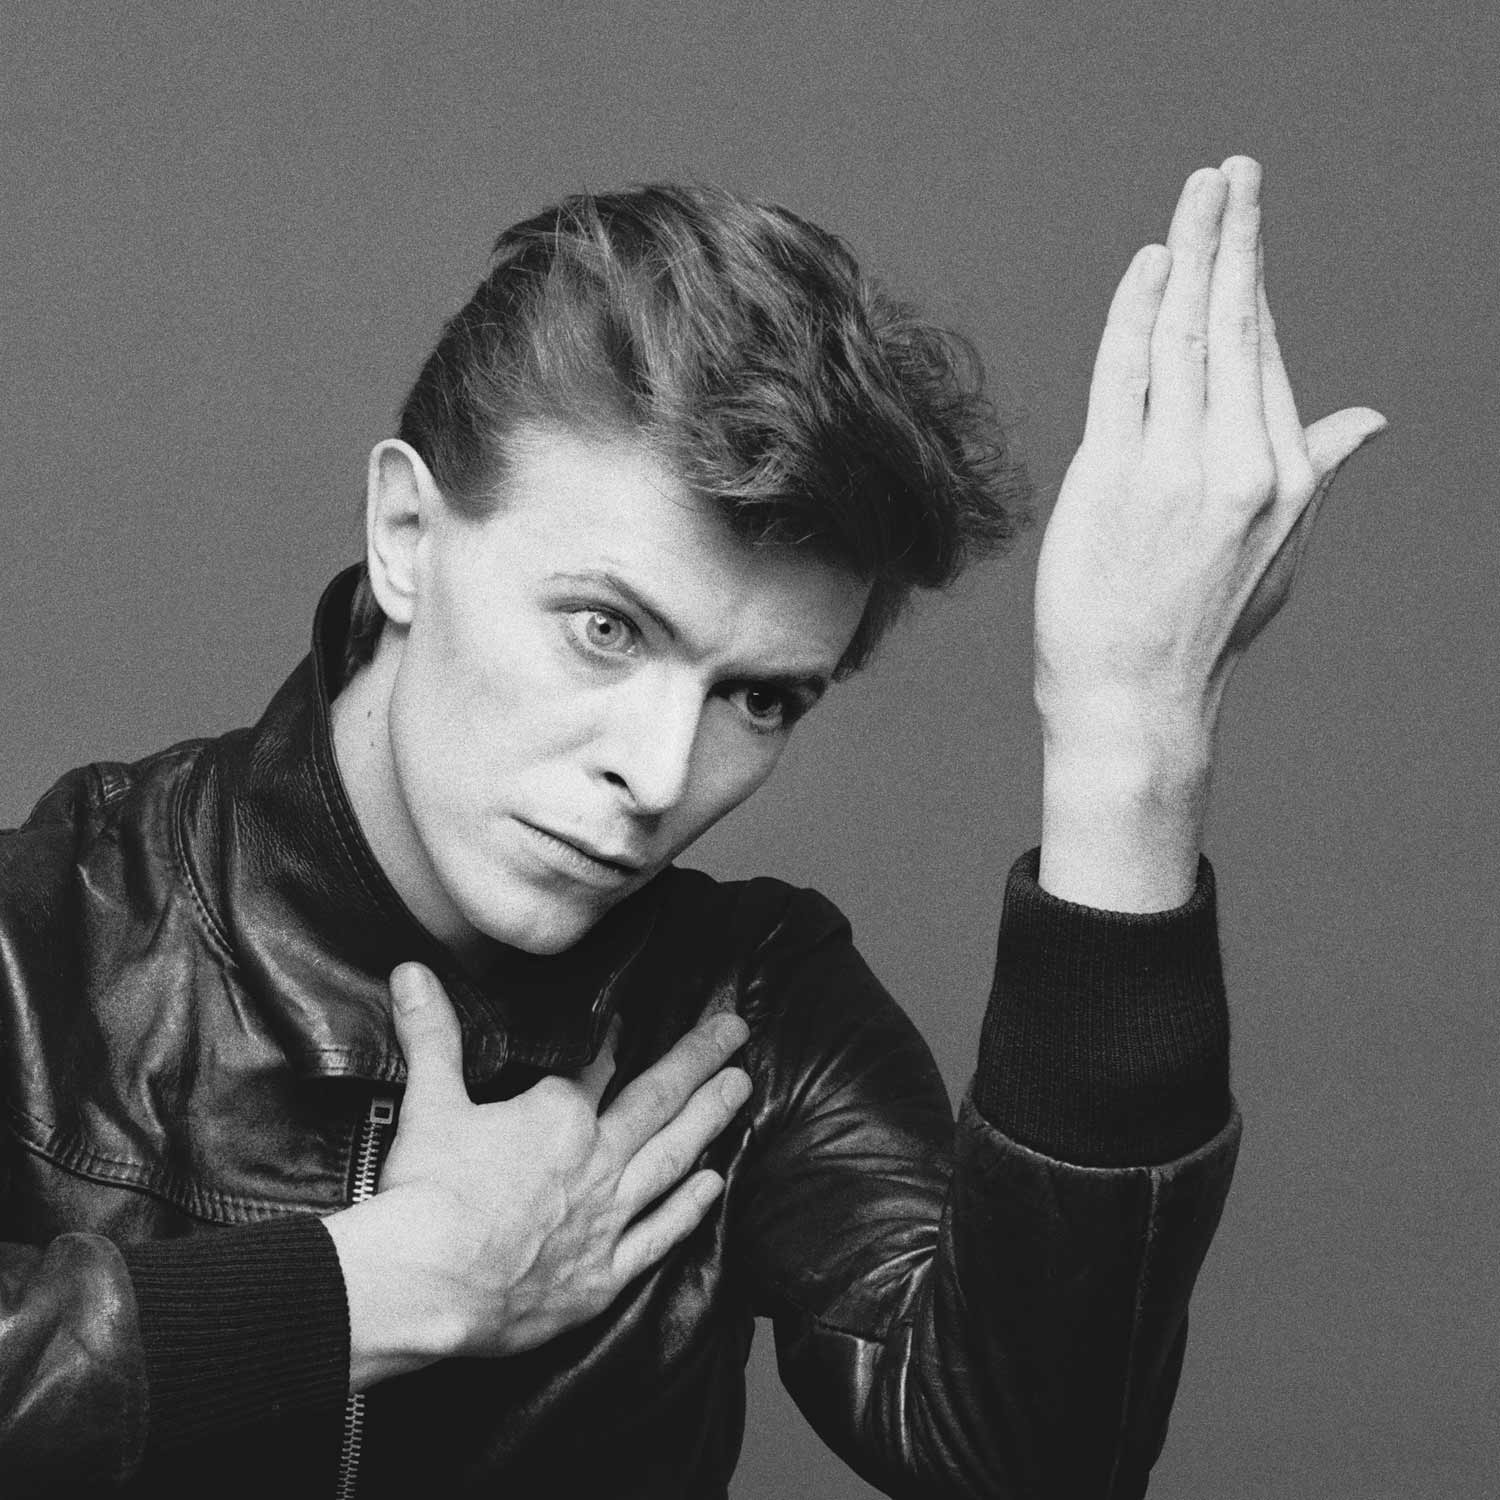 One Year On, We Should Remember David Bowie as Both Genius and Flawed Human